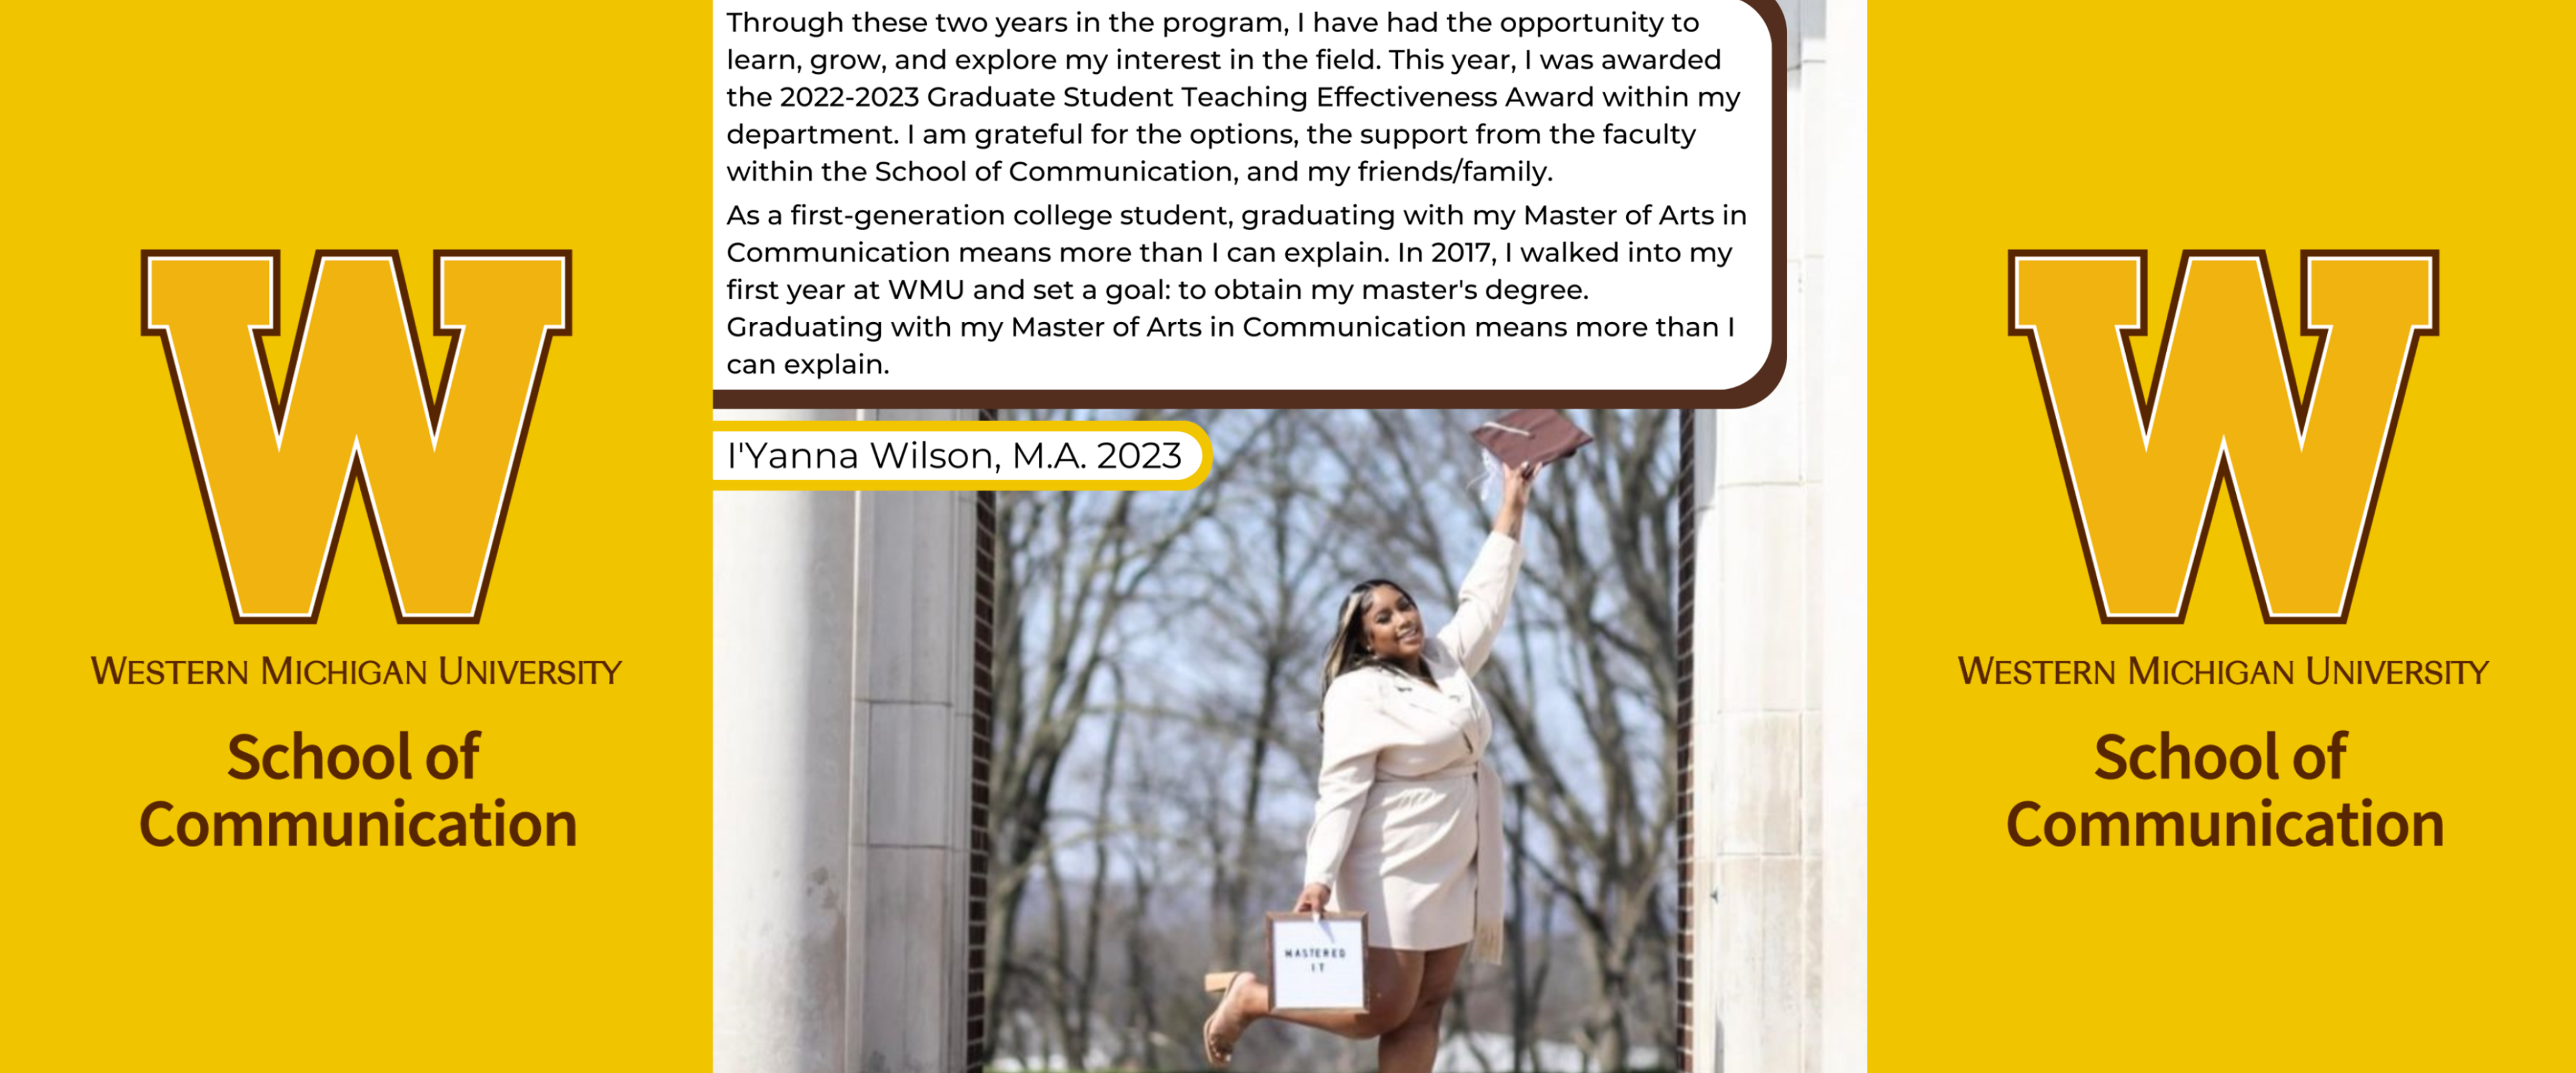 Student Testimonial of I'yanna Wilson: Through these two years in the program, I have had the opportunity to learn, grow, and explore my interests in the field. This year, I was awarded the 2022-2023 Graduate Student Teaching Effectiveness Award within my department. I am grateful for the options, the support from the faculty within the School of Communication, and my friends/family. As a first-generation college student, graduating with my Master of Arts in Communication means more than I can explain.